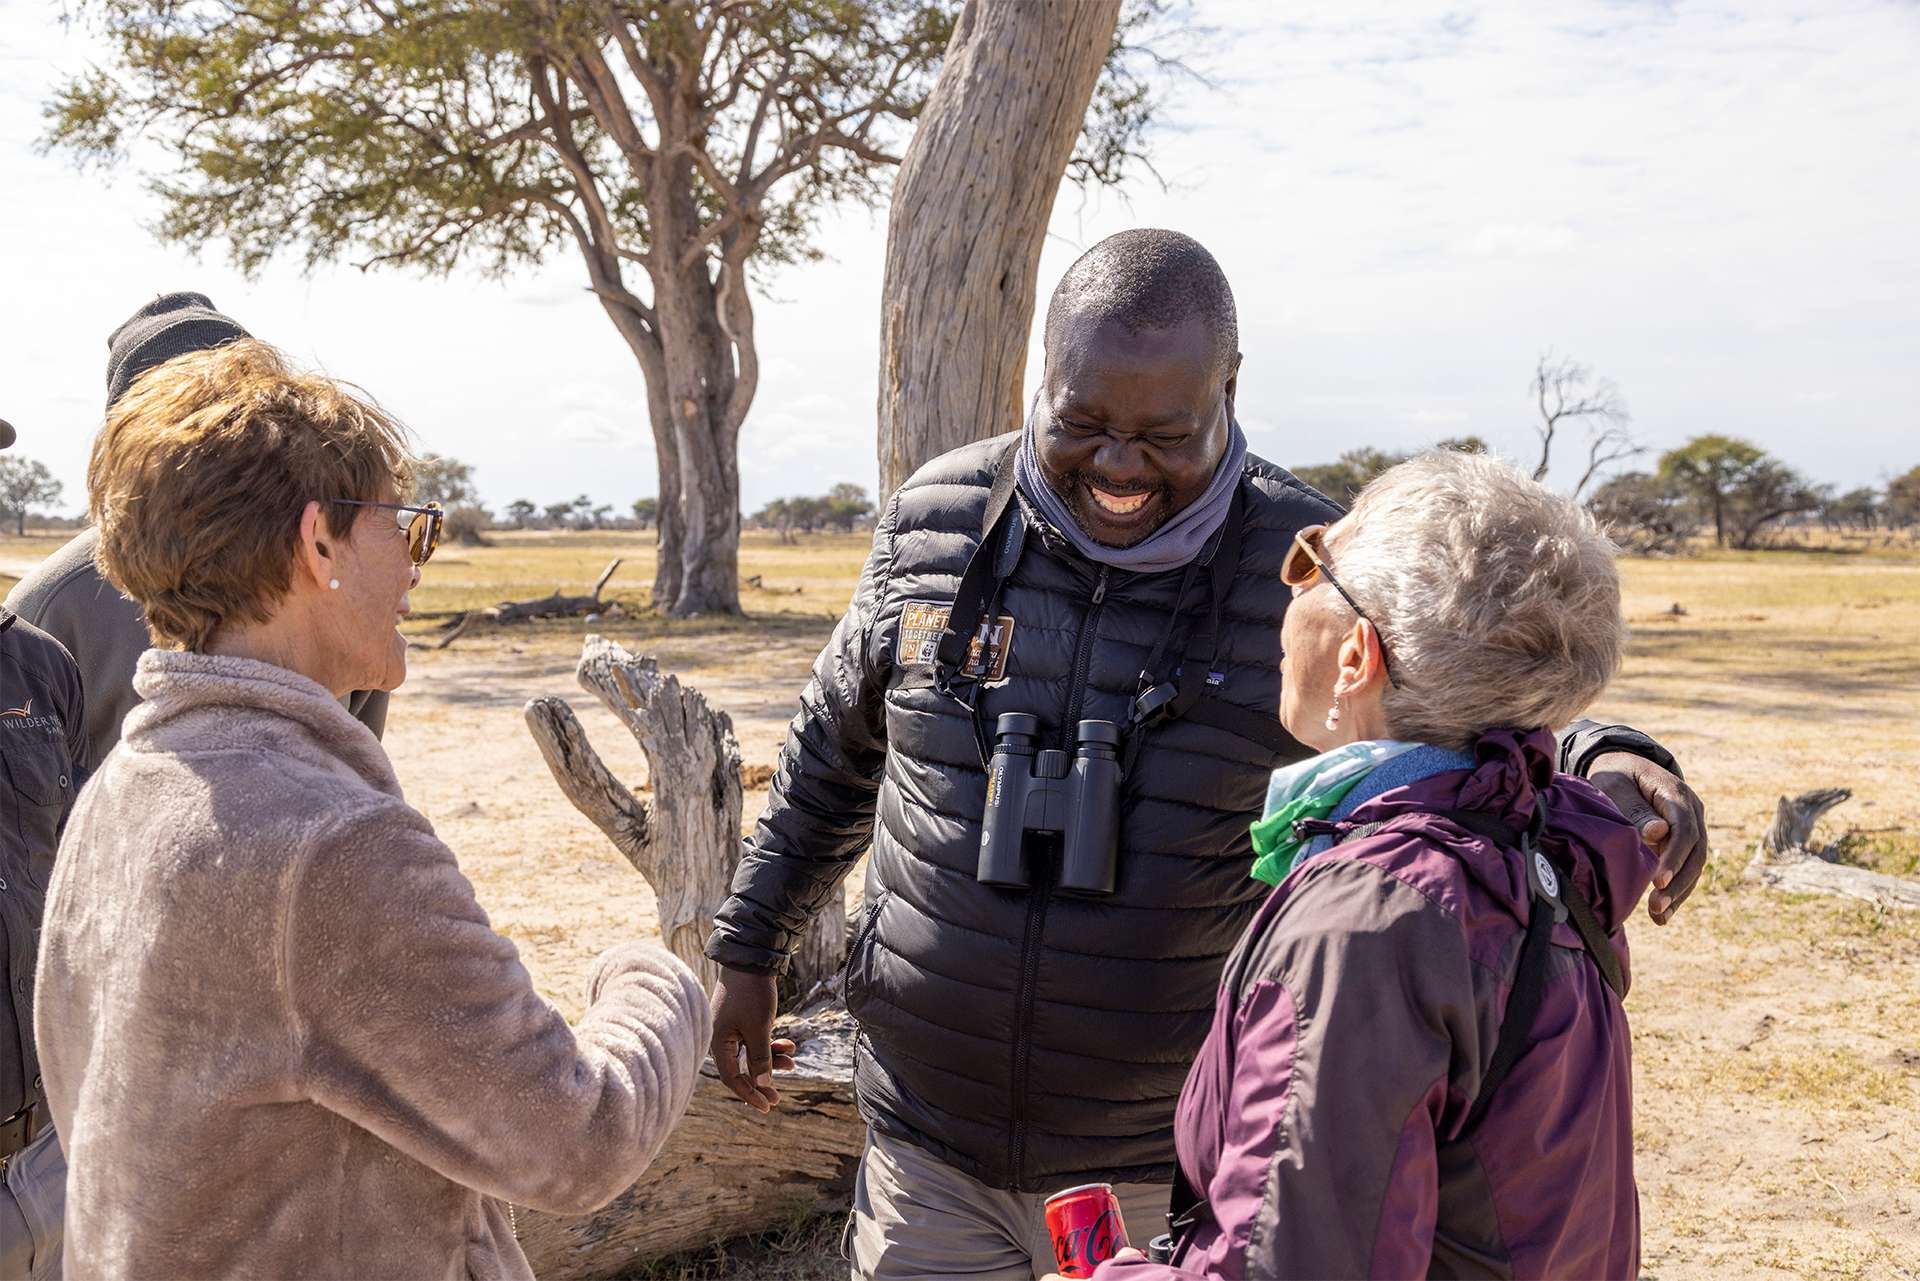 Nat Hab Expedition Leader naturalist wildlife guide laughing with guest travelers on safari in Zimbabwe Africa